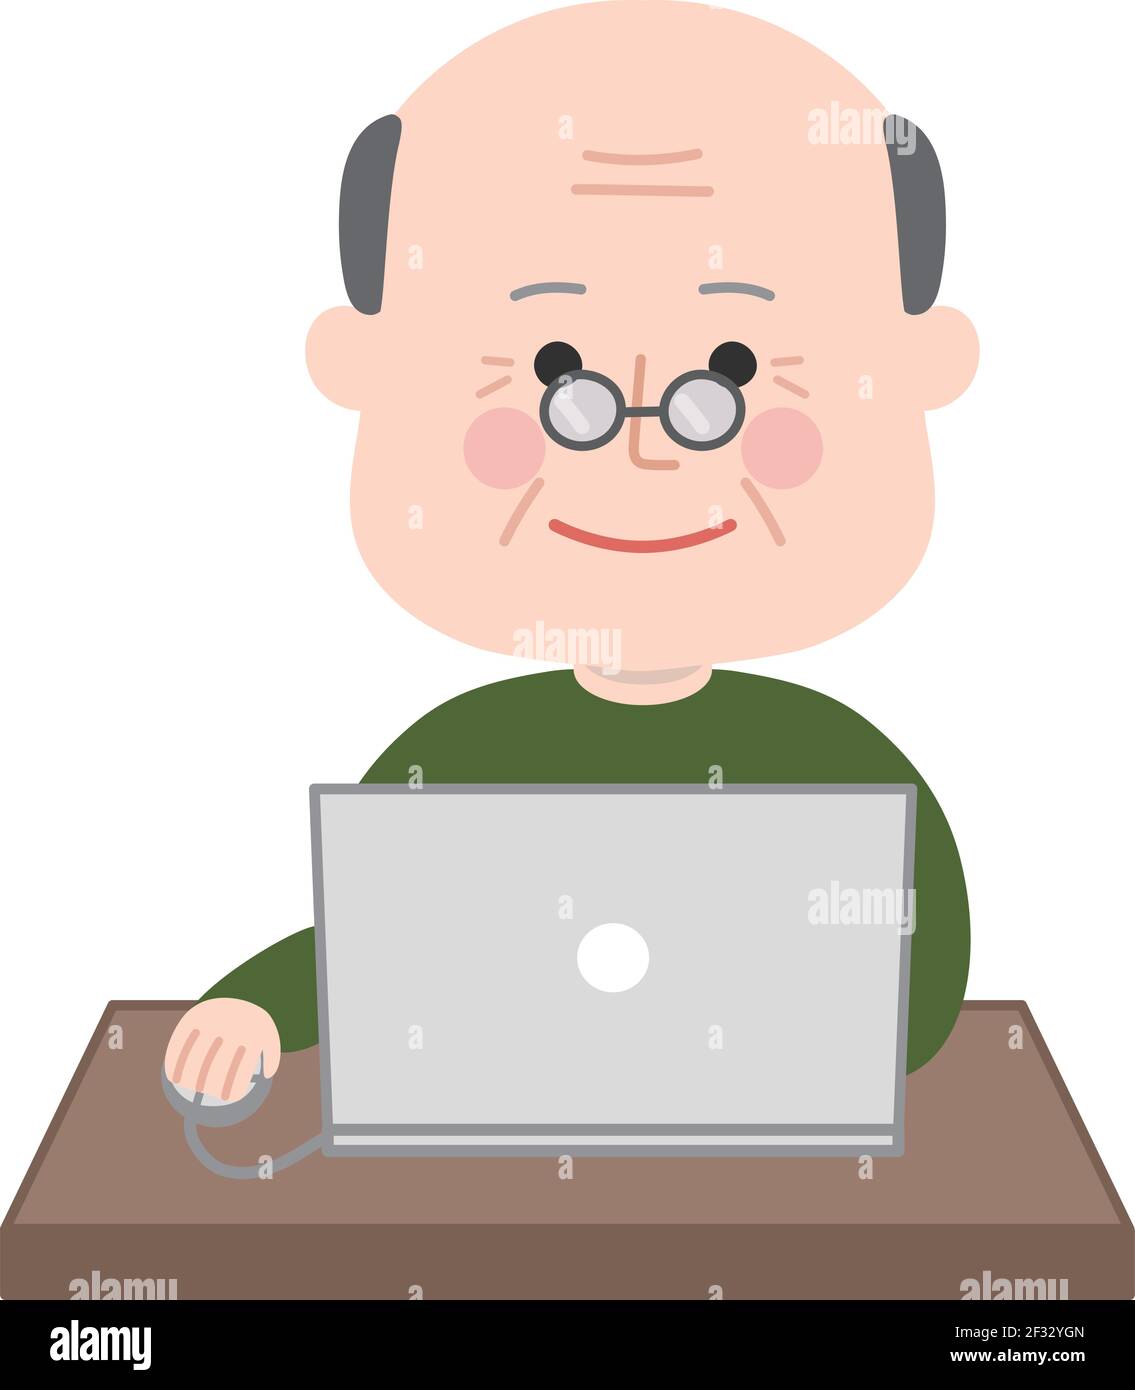 Elderly man using a laptop computer. Vector illustration isolated on white background. Stock Vector